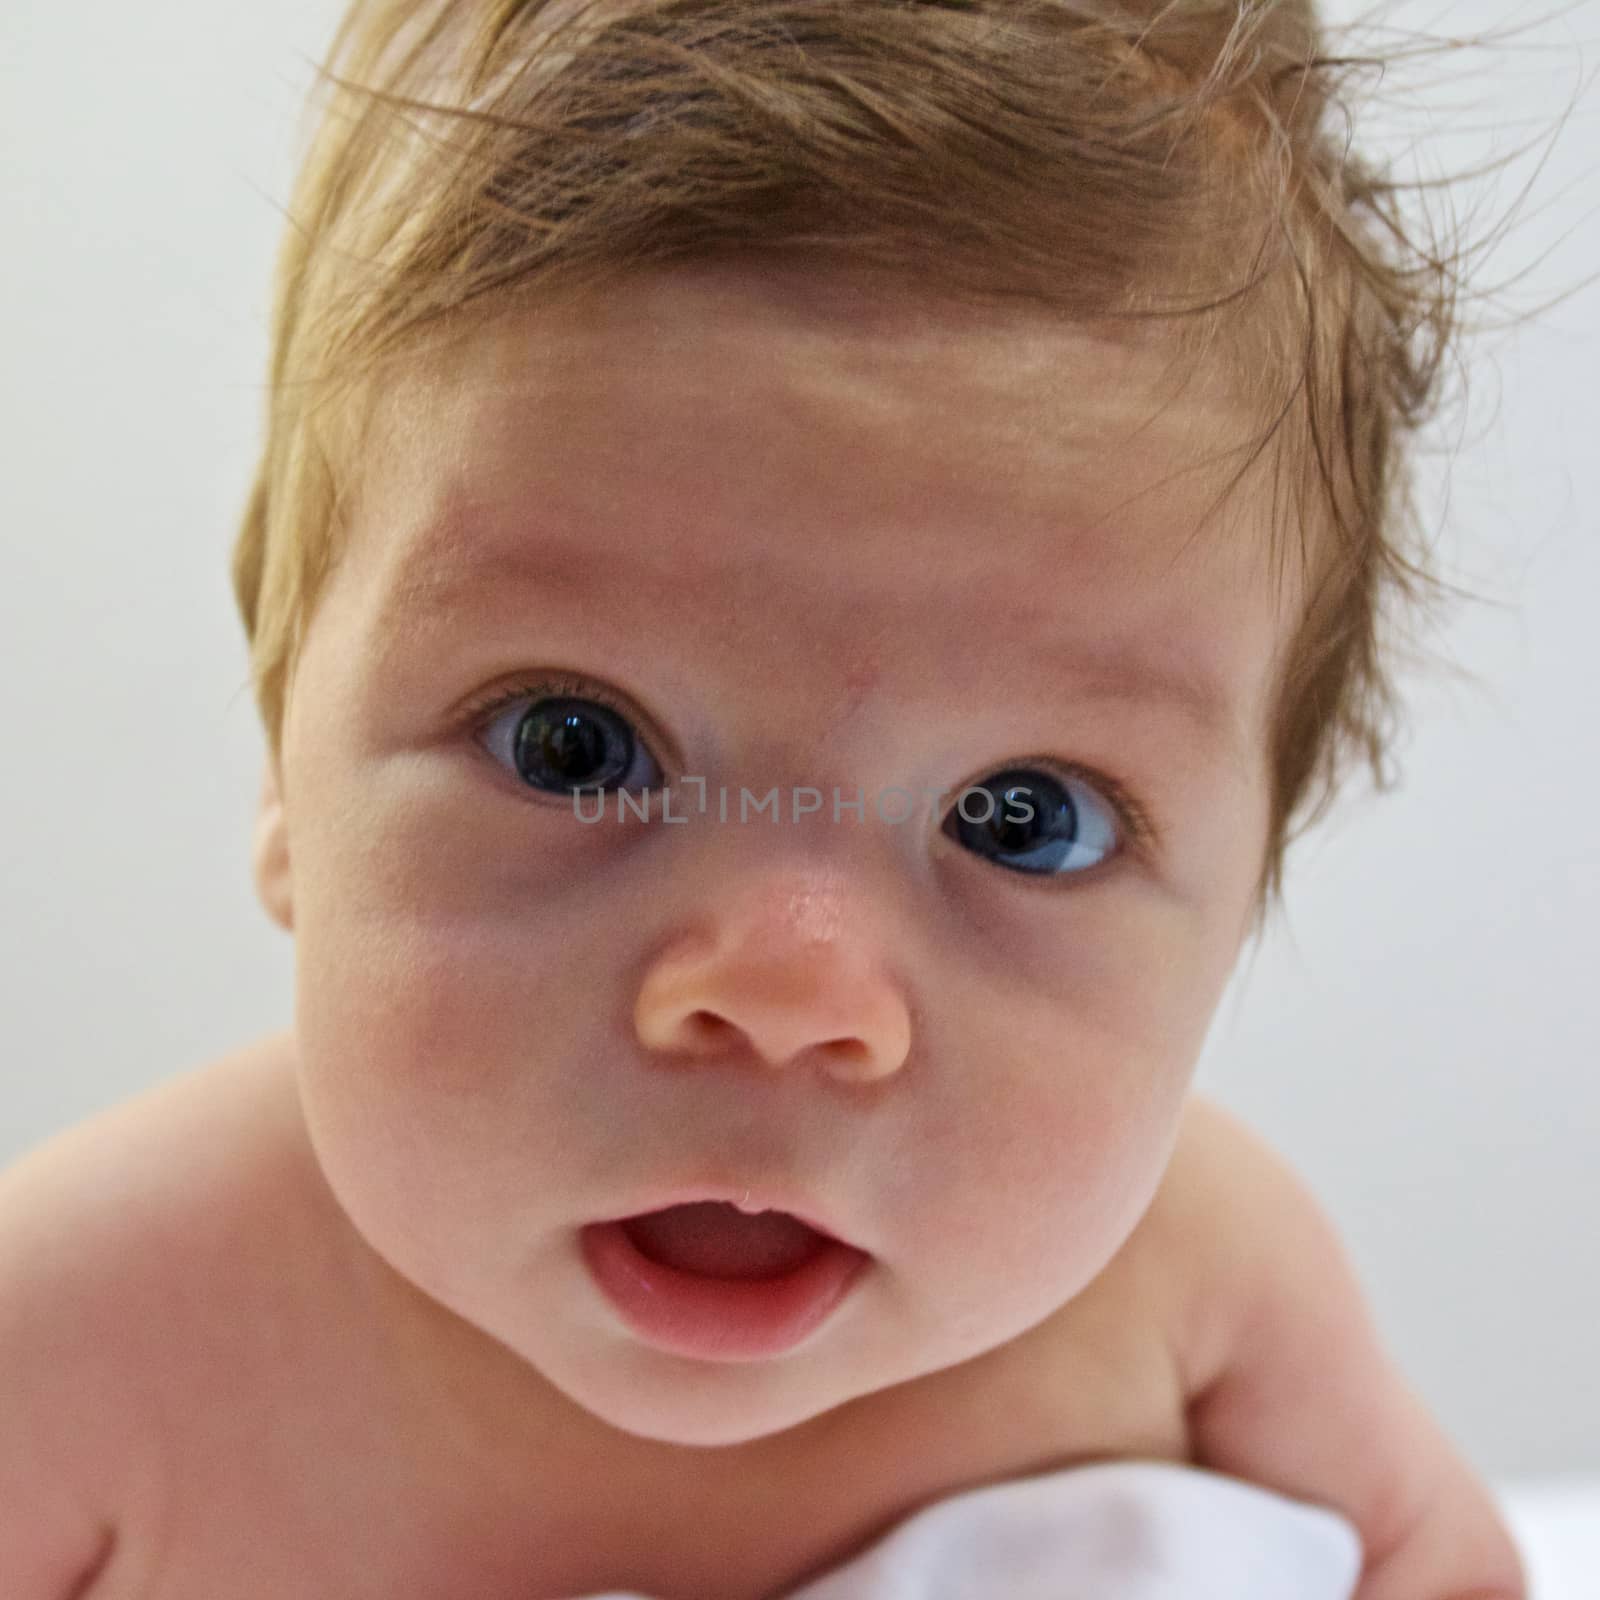 Baby Boy With White Background by jhlemmer